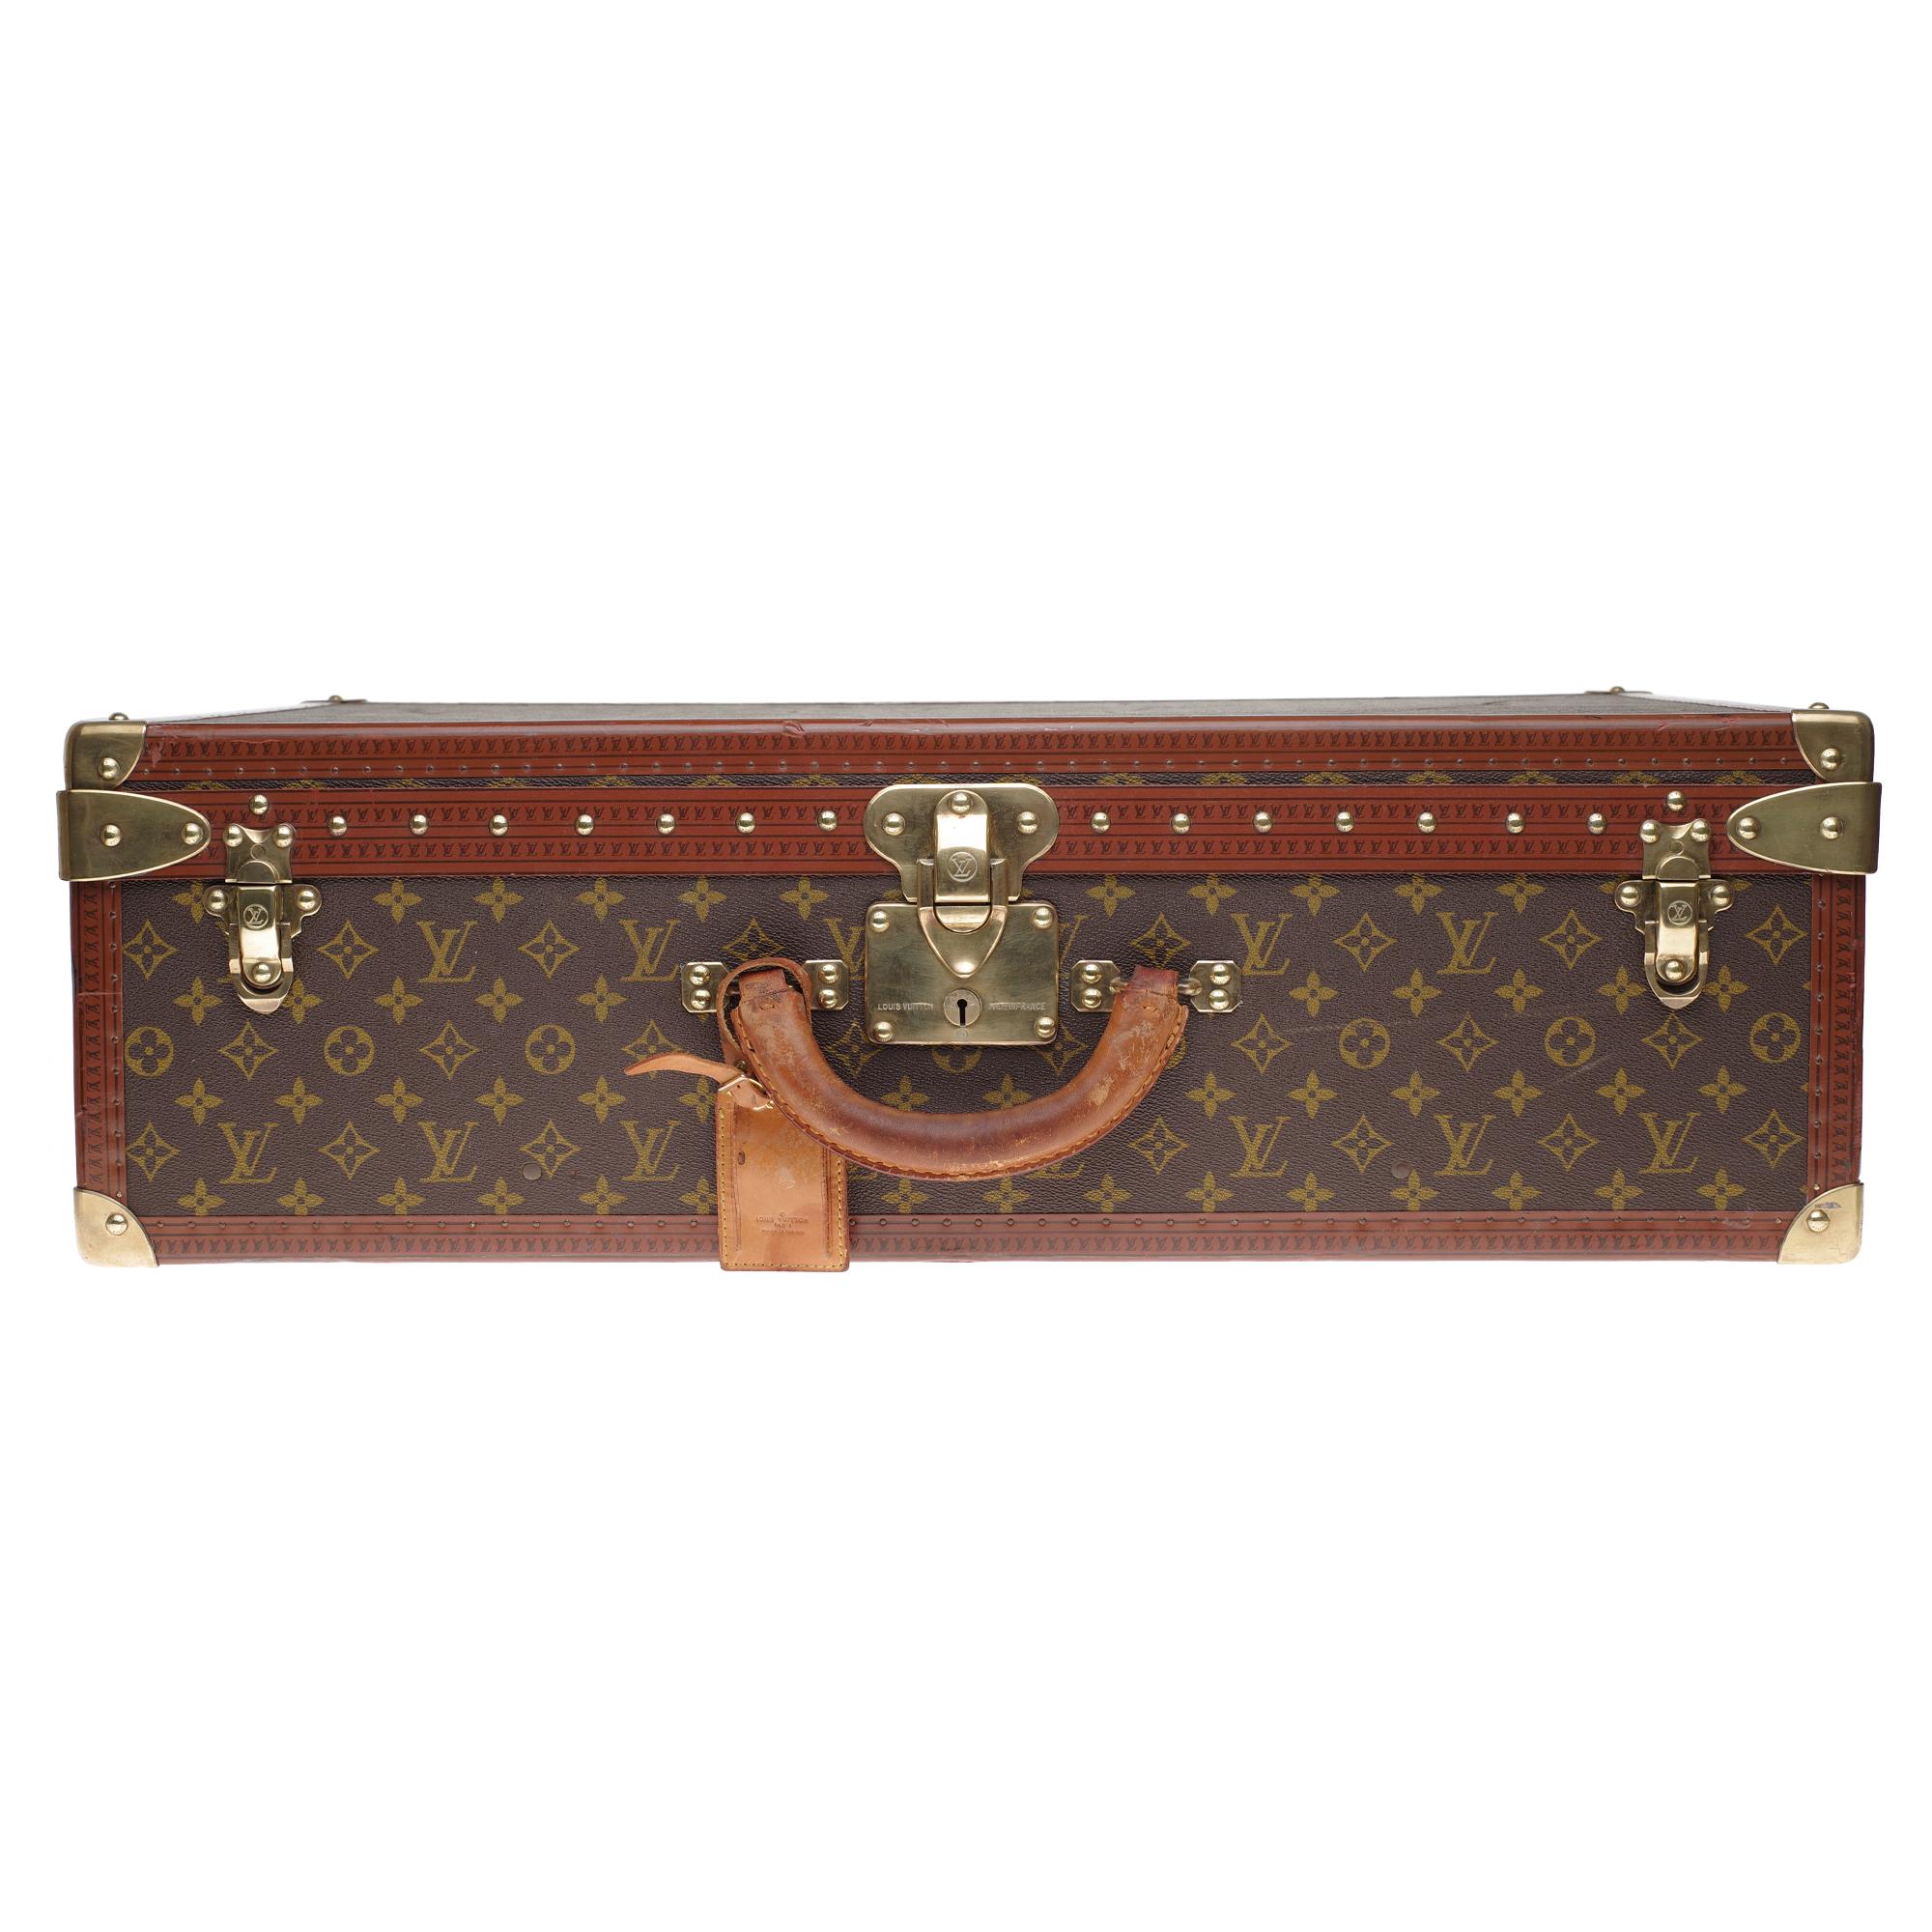 Superb decorative and collector piece: Louis Vuitton 70cm case in monogram canvas, label with serial number, brass trim, natural leather handle for carrying.

Three brass clasps.
Lining in beige canvas, two straps to hold clothes.
Signature: 